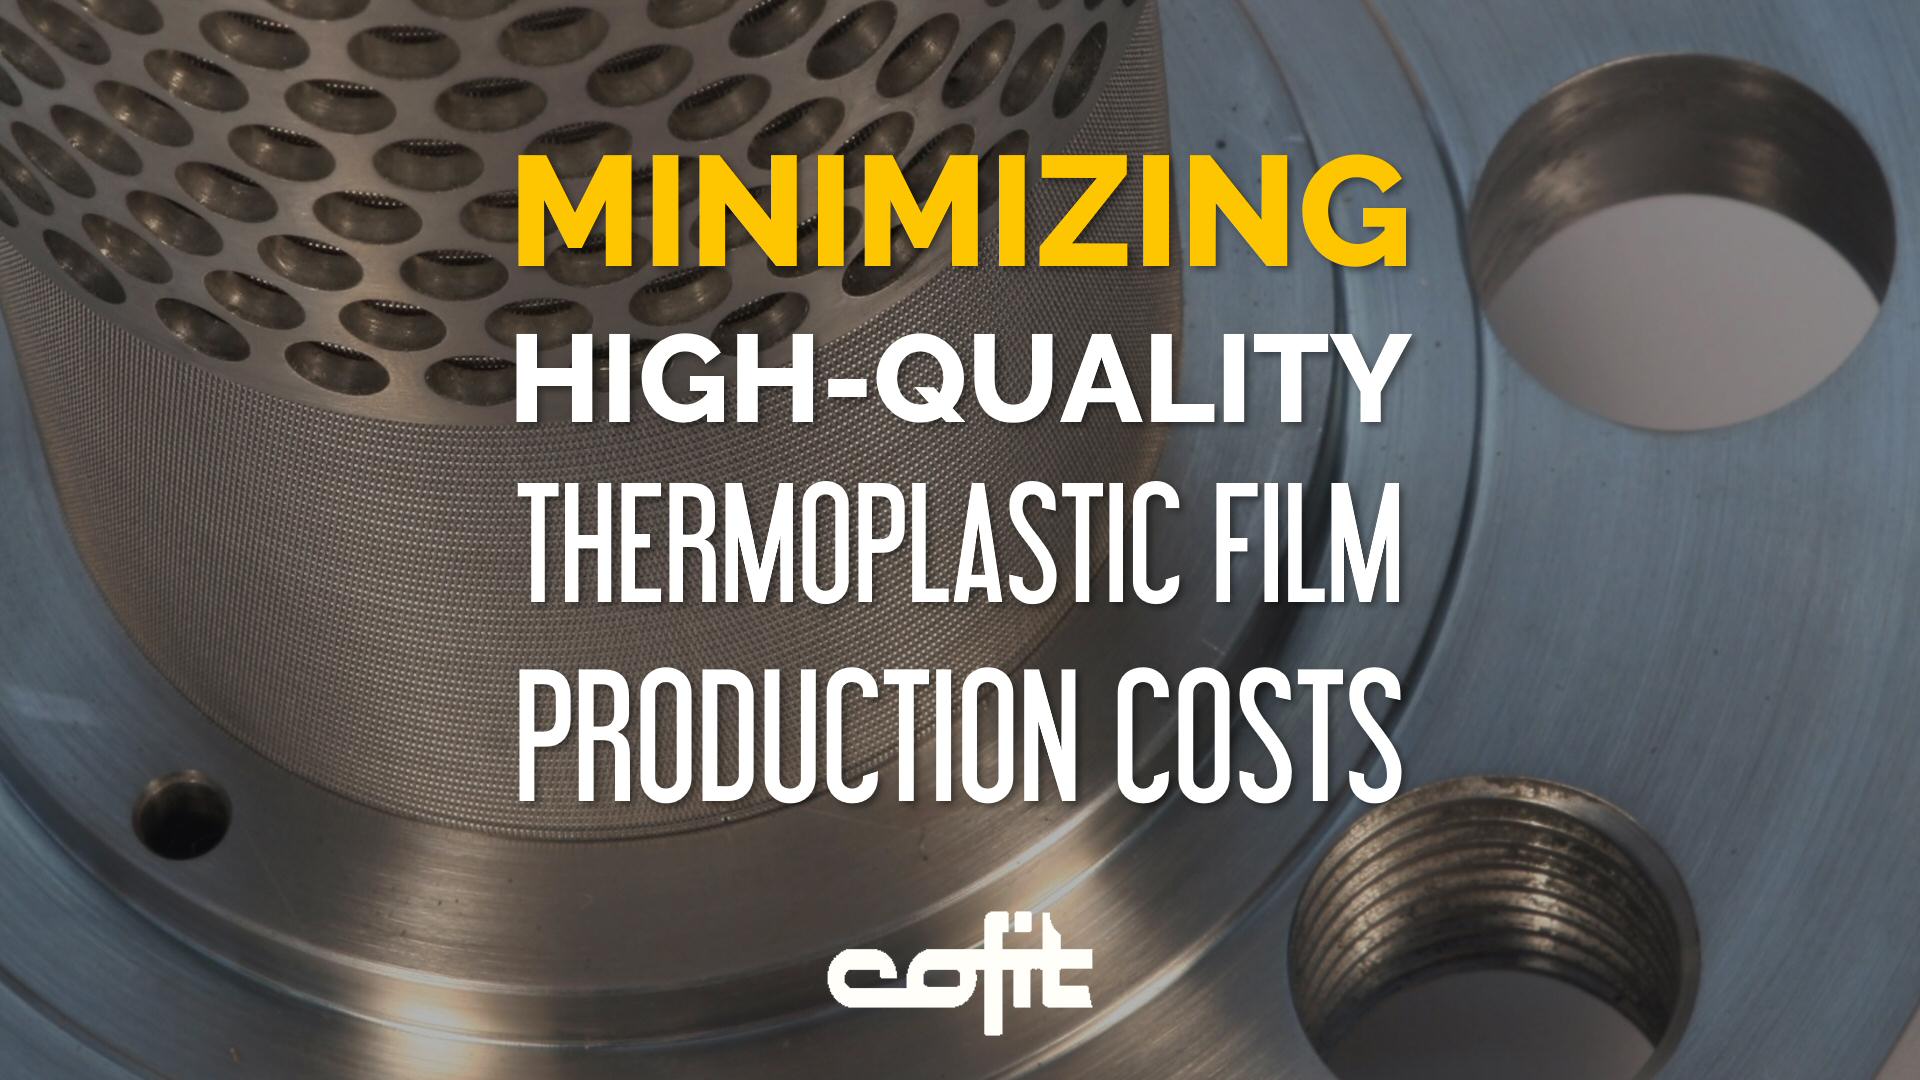 Minimizing high-quality thermoplastic film production costs